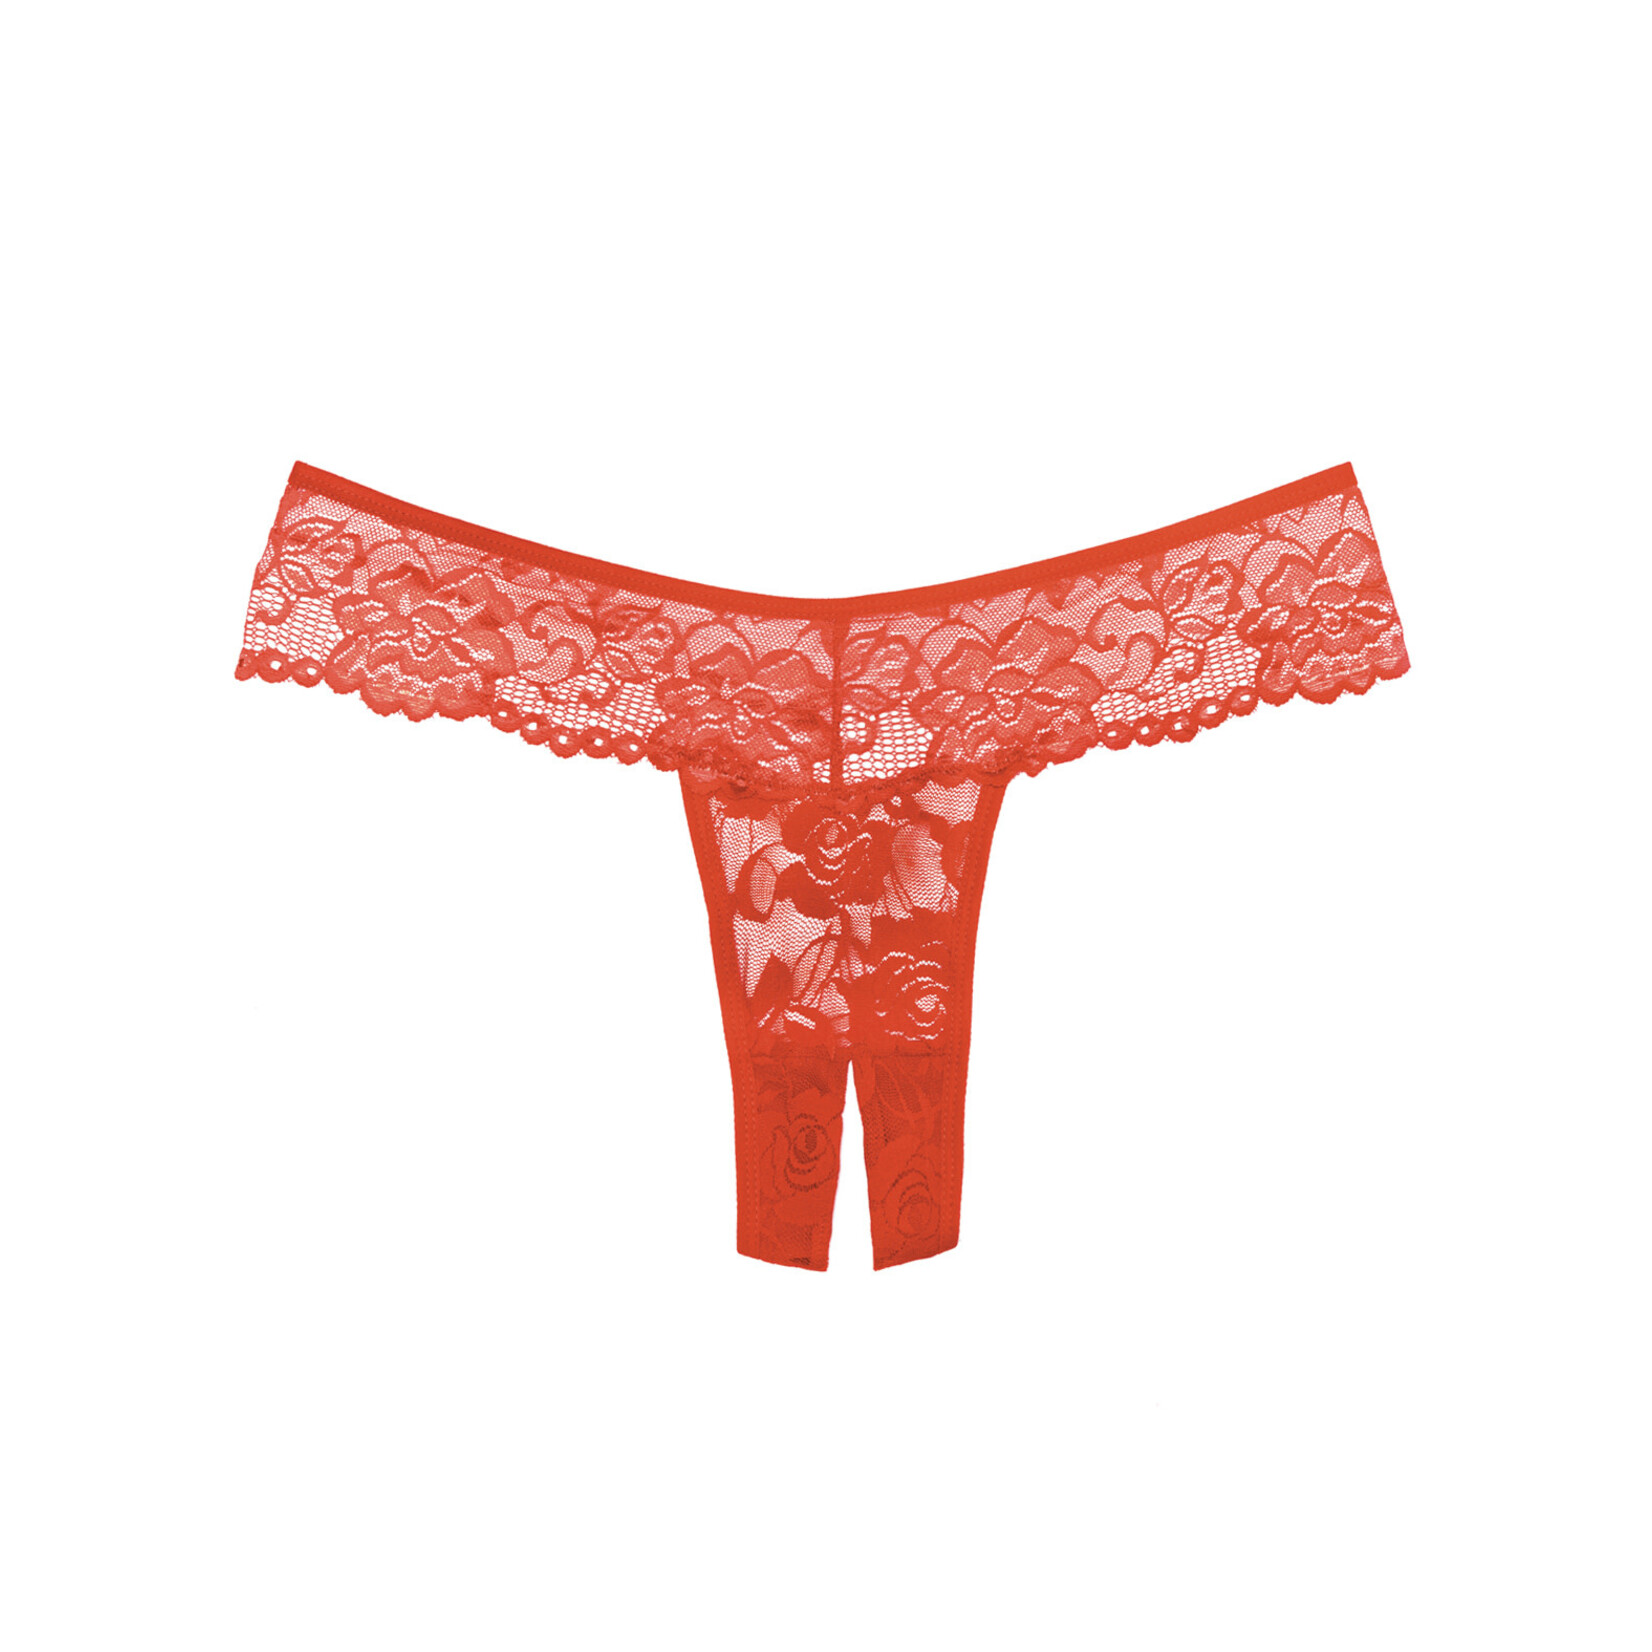 ALLURE LINGERIE ALLURE ADORE - CHIQUI LOVE PANTY - RED - ONE SIZE